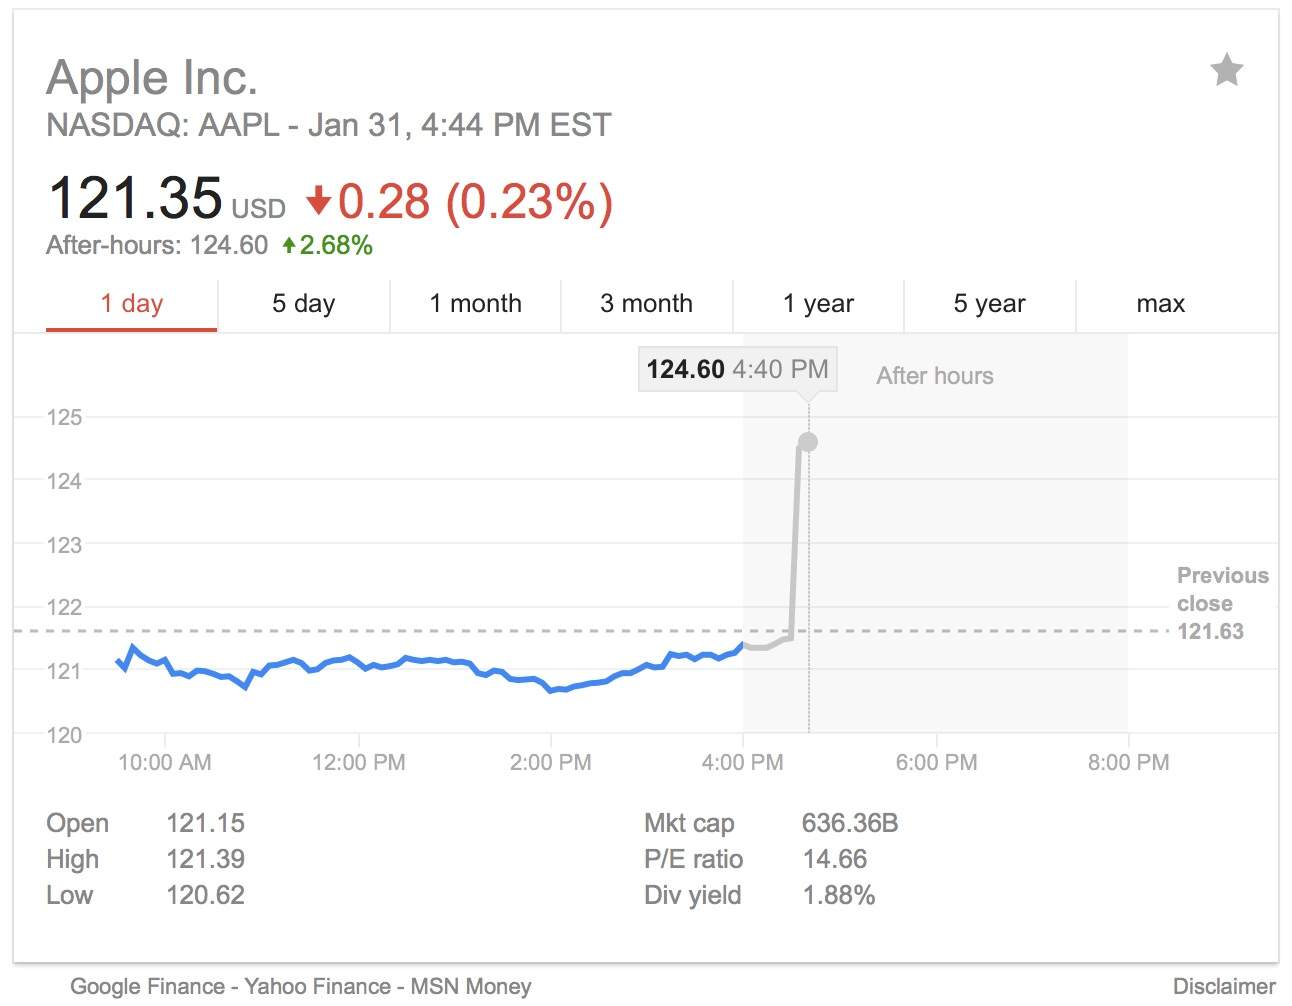 AAPL stock chart